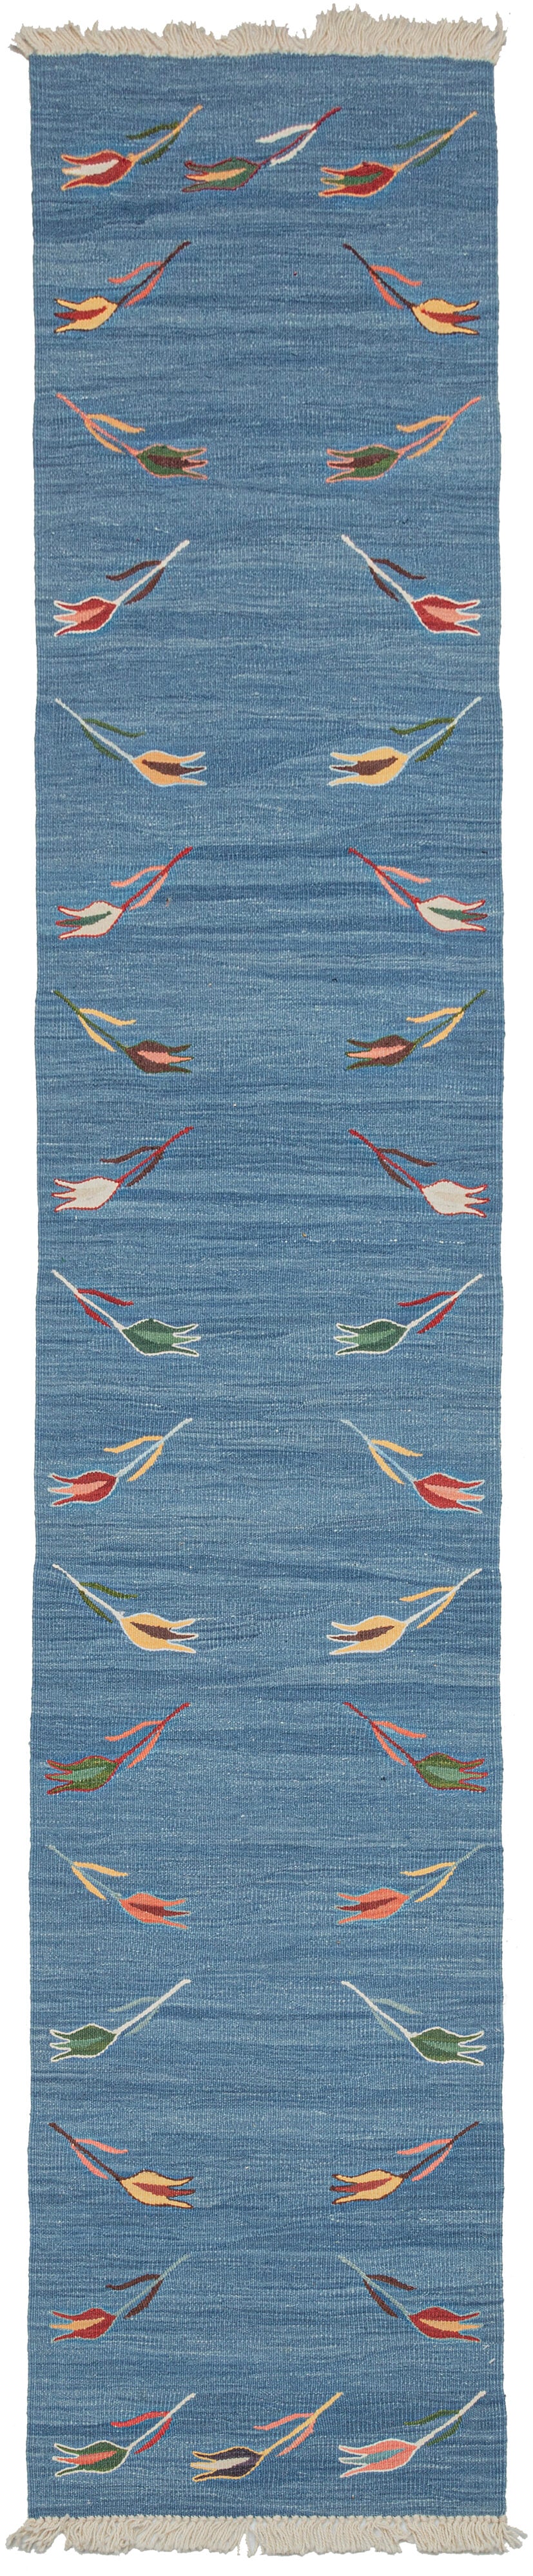 Blue tulip motif kilim runner featuring a repetition of delicate polychrome tulips around a blue field. The tulips are finely woven of handspun wool in naturally dyed tones of yellow, green, brown, red, and pink and float upon an indigo field. The indigo background vibrates with each natural variation giving it a simple and straightforward presence, as well as a special feeling.